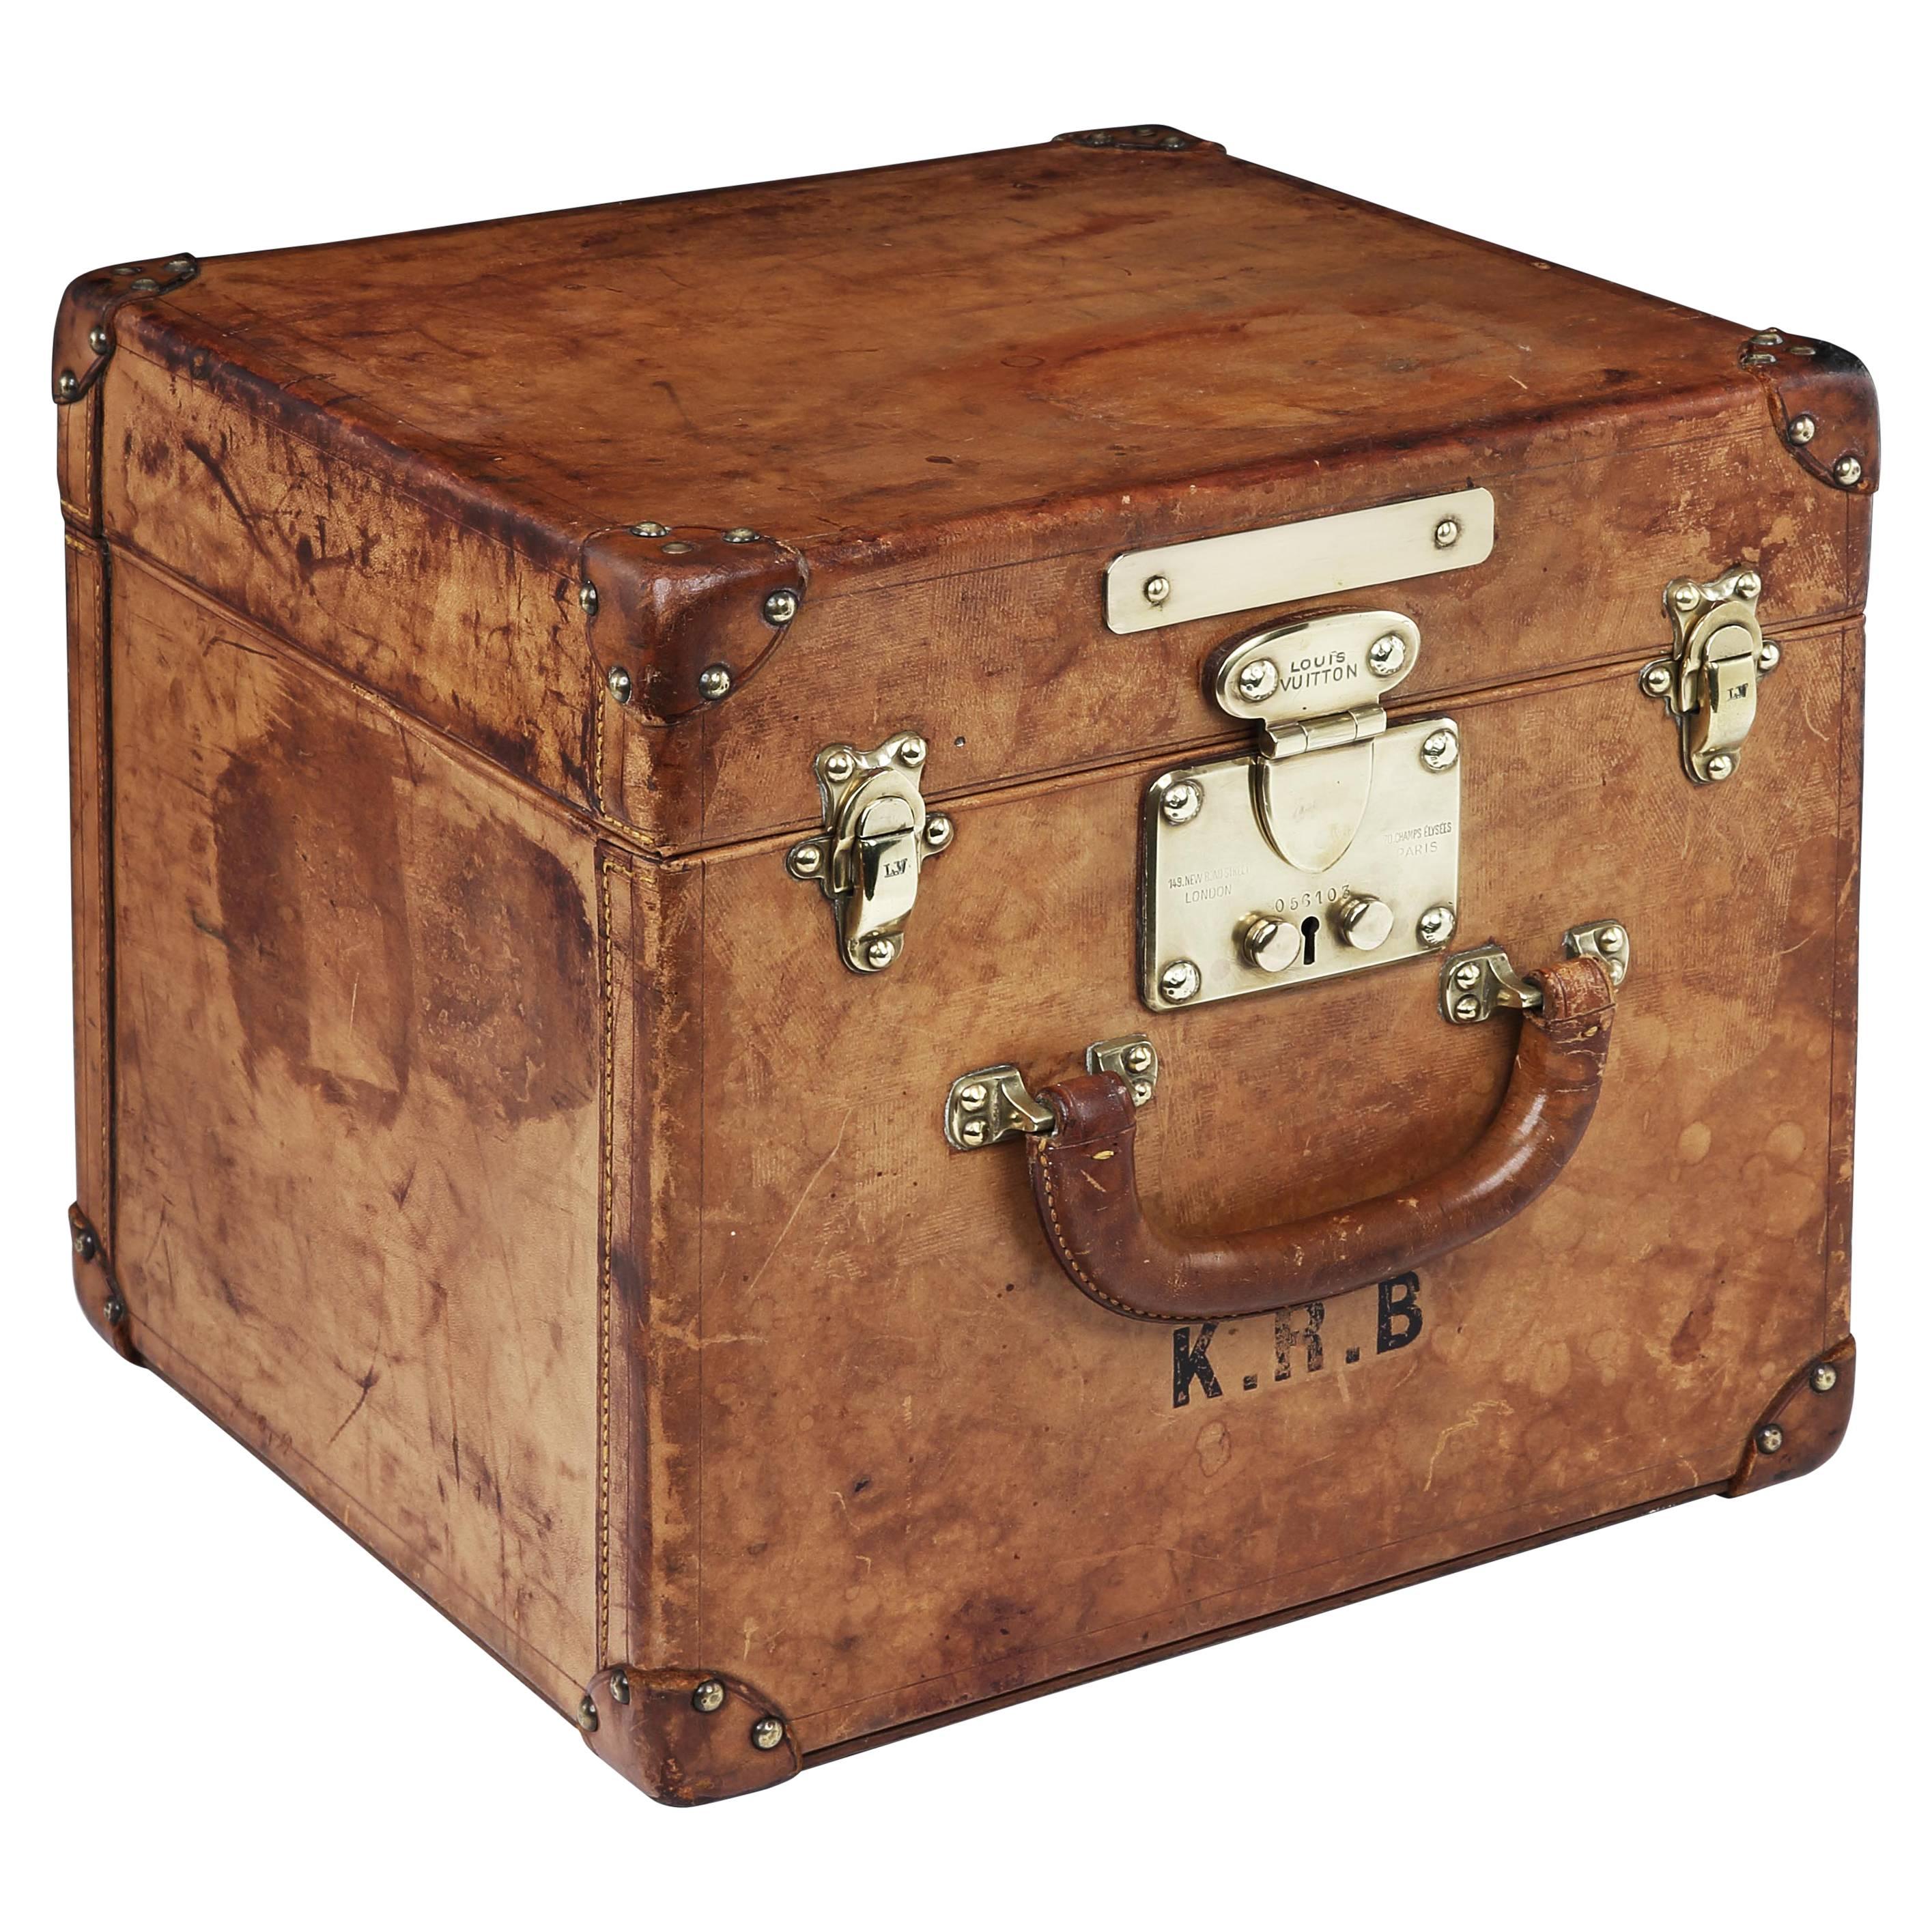 Louis Vuitton 'Top Hat' Trunk Humidor in Natural Leather, 1910